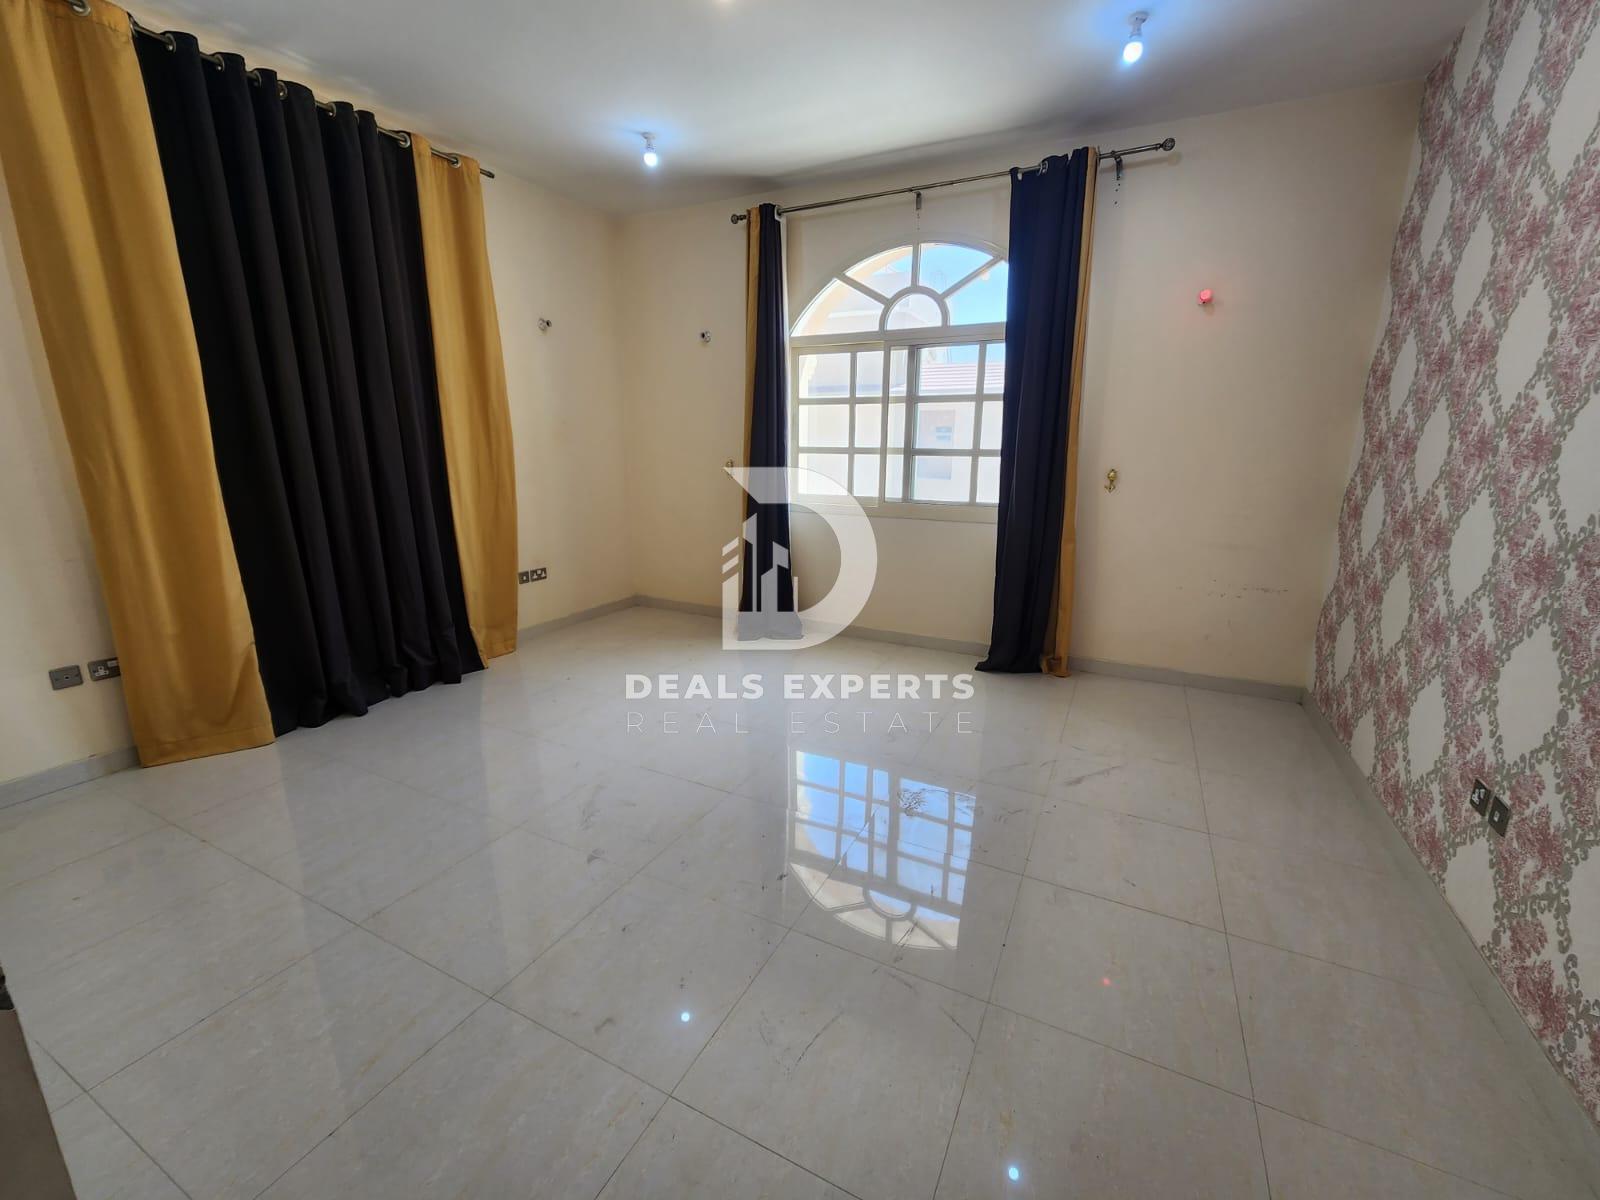 4 bed, 6 bath Compound for rent in Mohamed Bin Zayed City Villas, Mohamed Bin Zayed City, Abu Dhabi for price AED 120000 yearly 